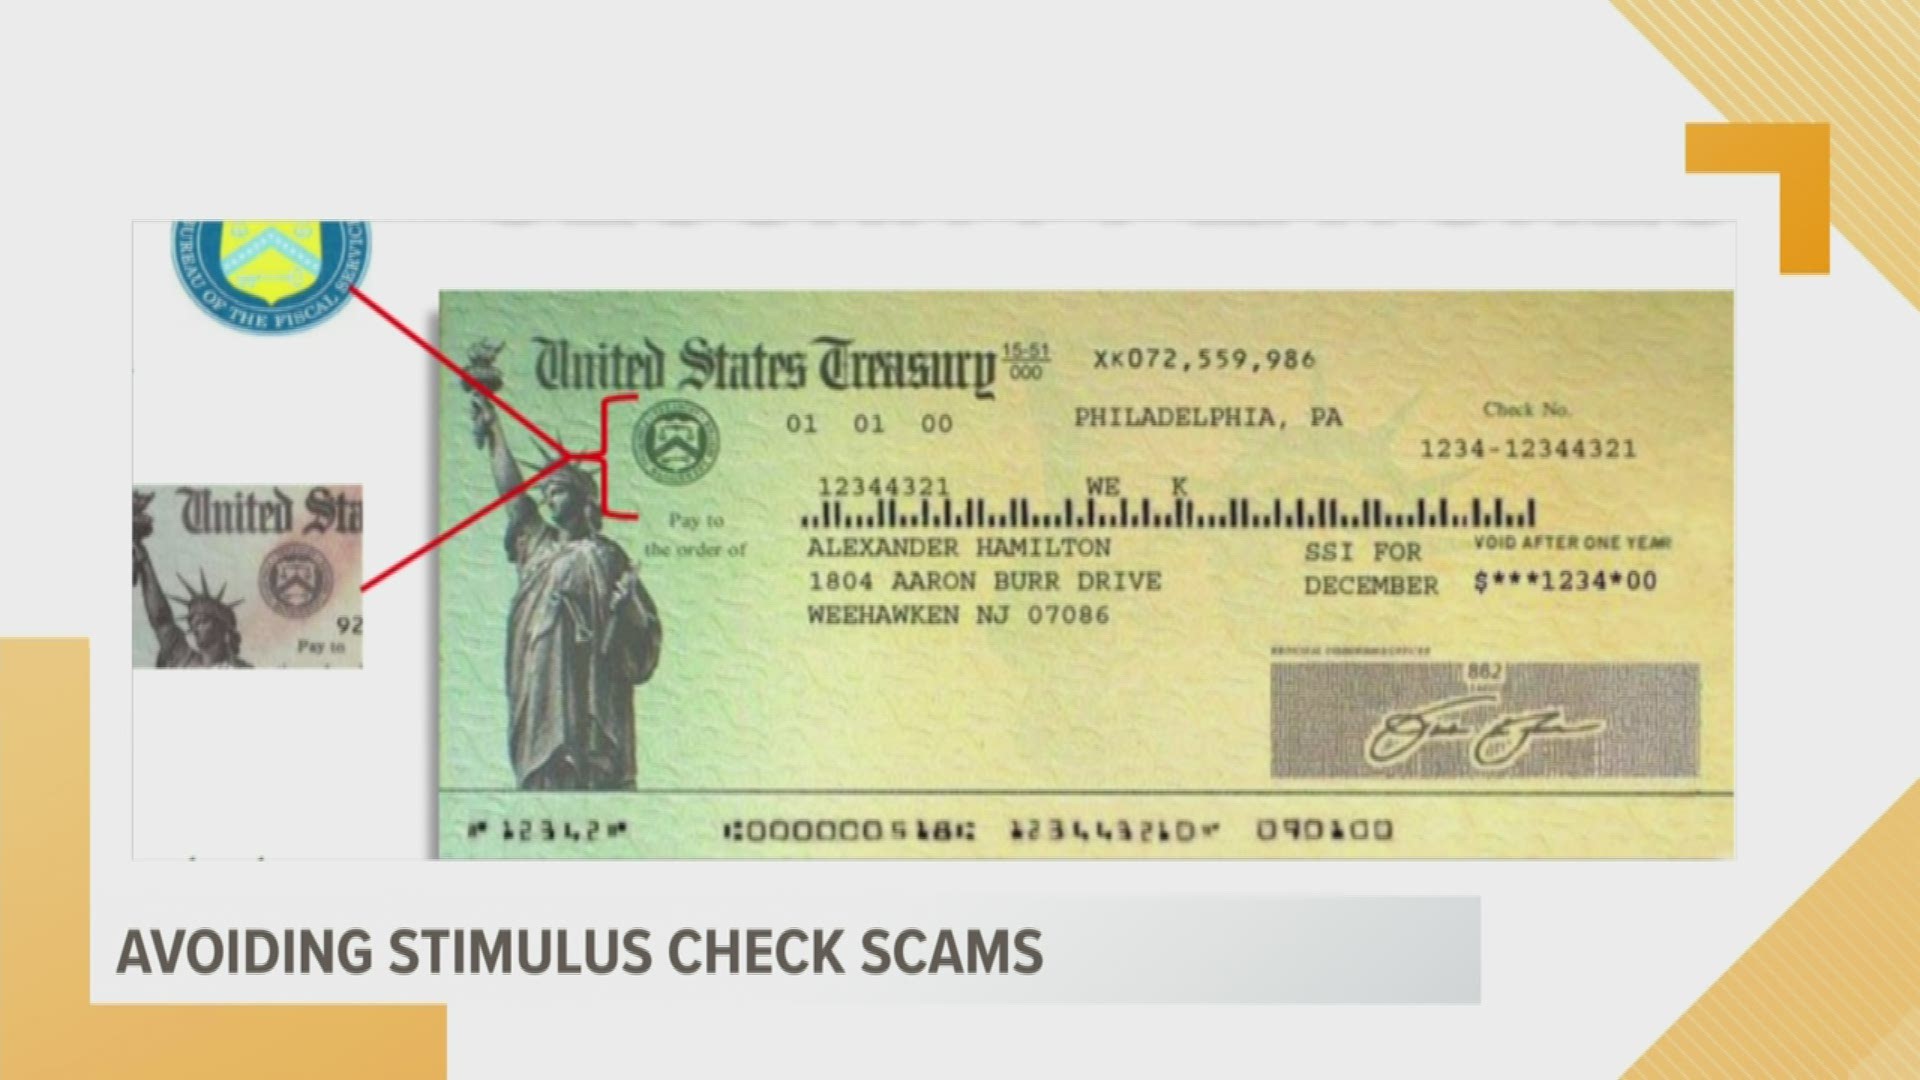 In preparation, the U.S. Treasury Department has issued guidelines for security features on the government-issued checks.